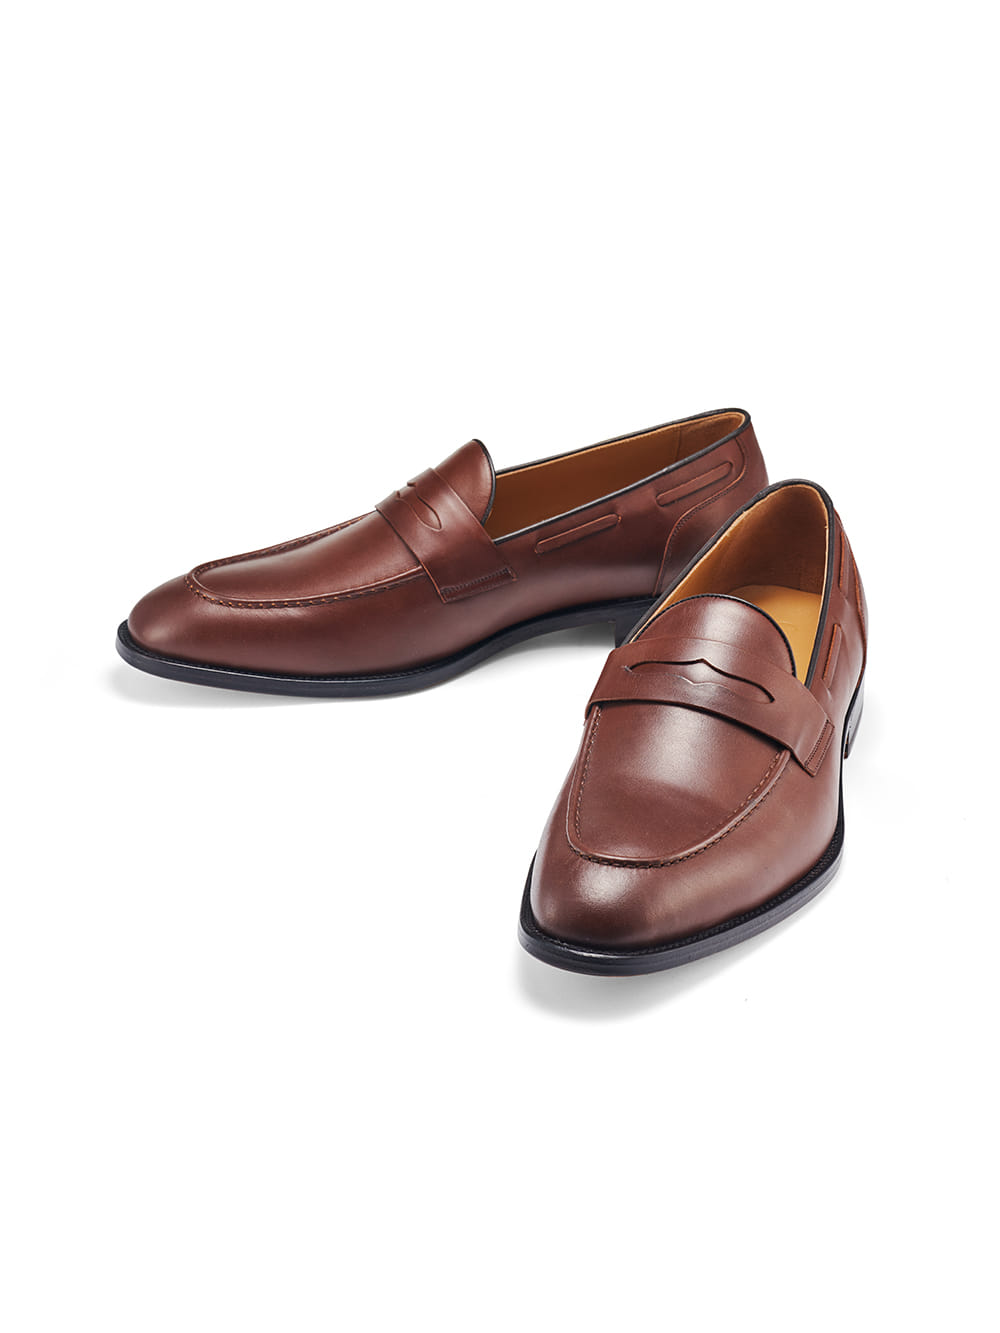 Penny Slot Leather Loafers (Brown)